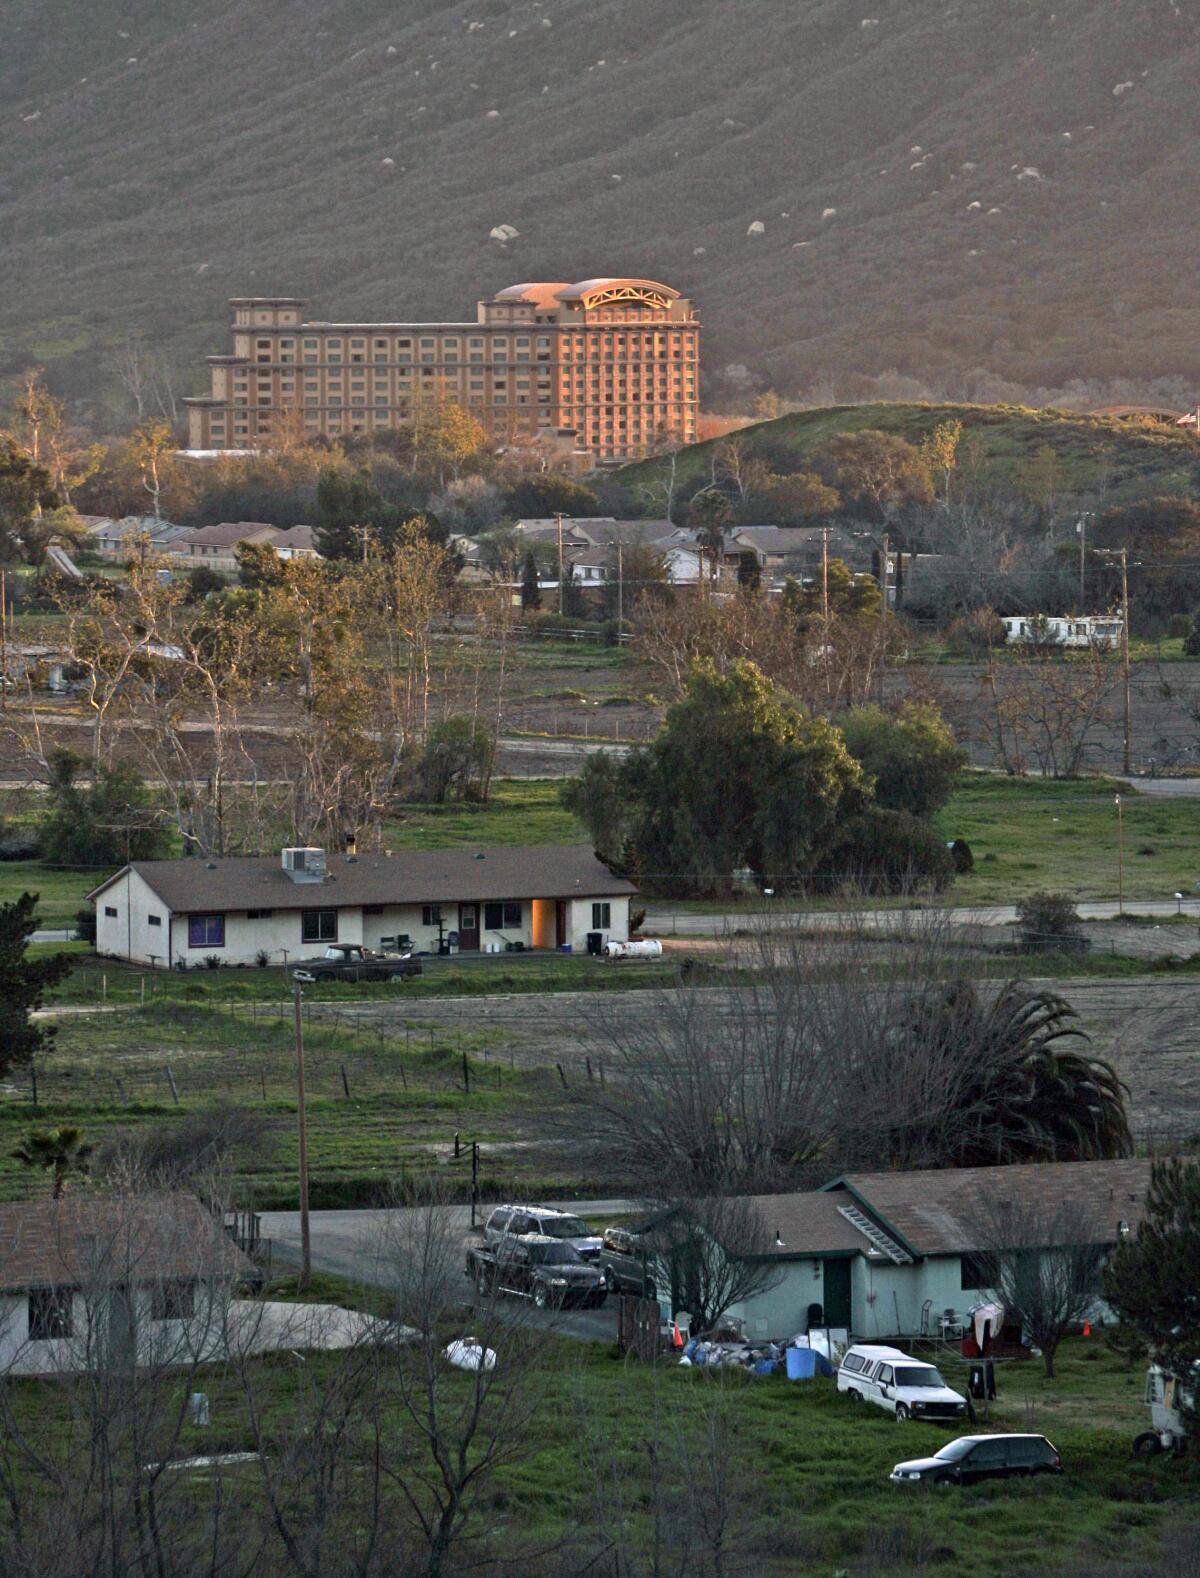 The Pala Casino looms in the background of the homes (foreground) on the Pala Indian Reservation.